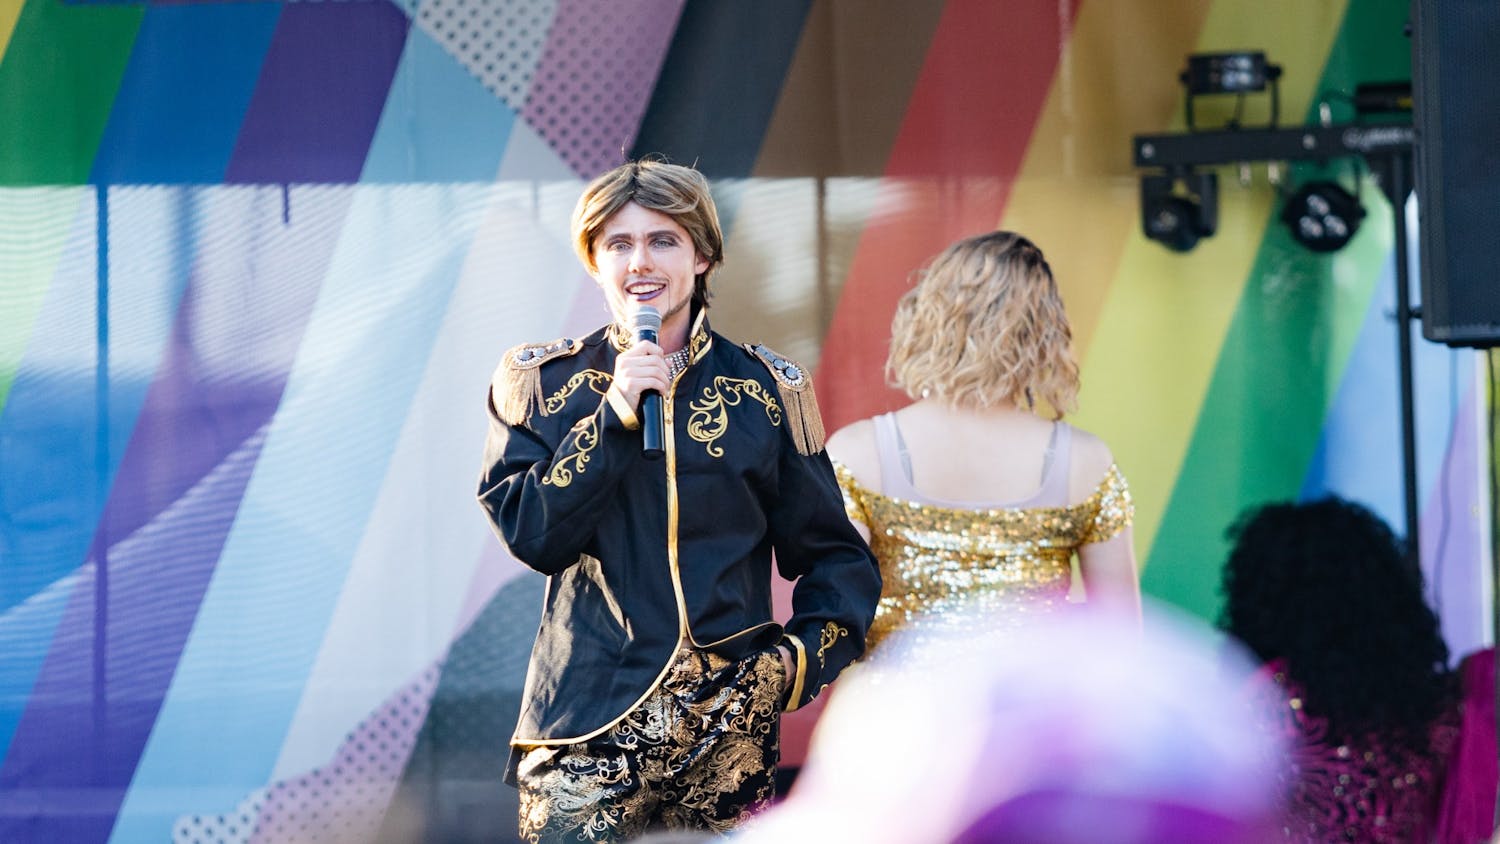 A drag king walks across the stage in an attempt to win the title of Mr. Outfest 2022 on June 4, 2022. Outfest featured performances, food and vendors in honor of Pride month.